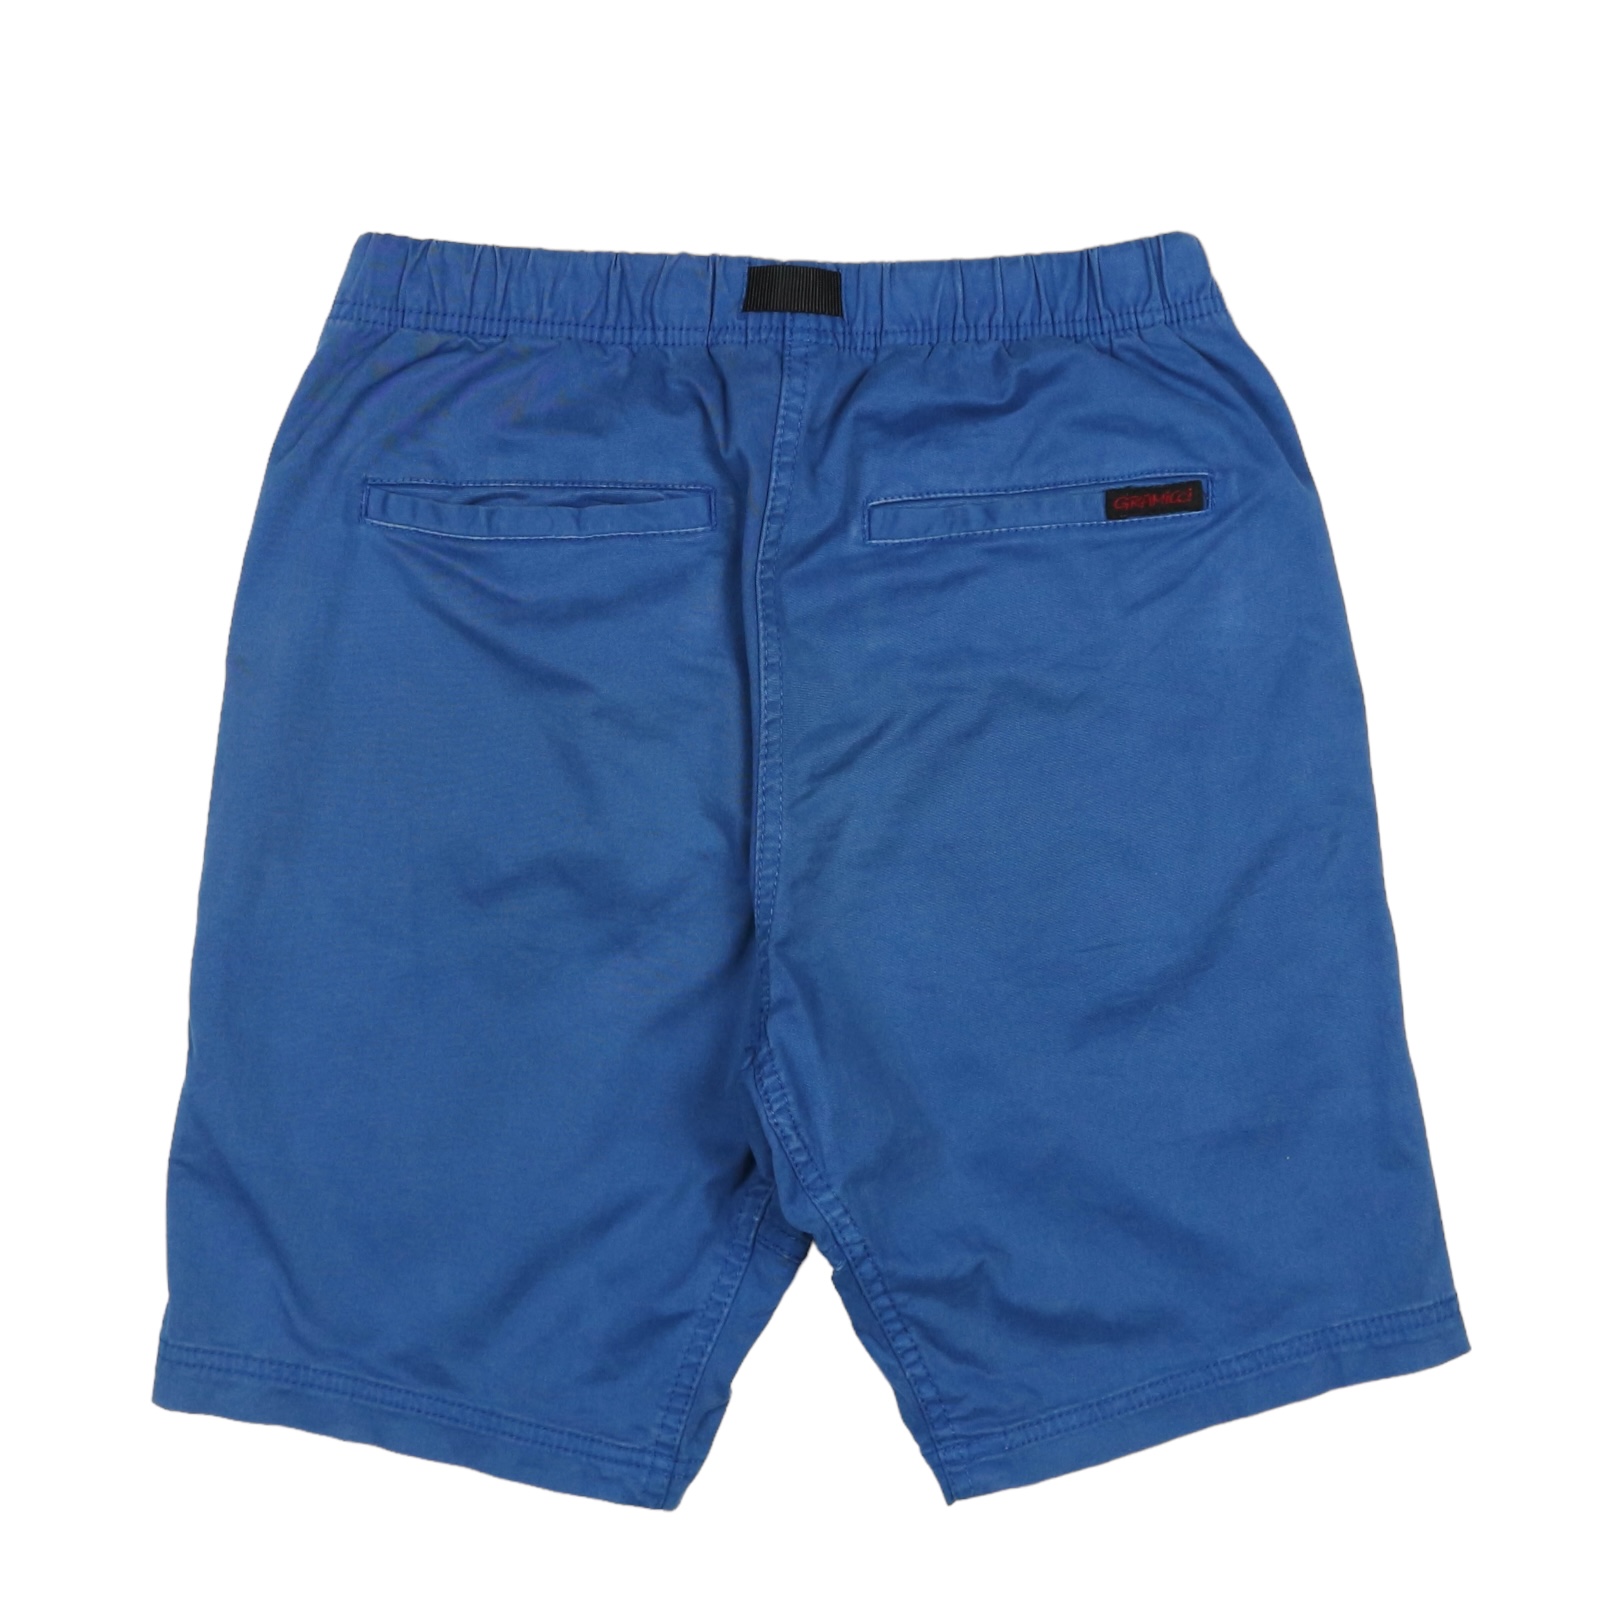 Gramicci Outdoor Shorts Size M